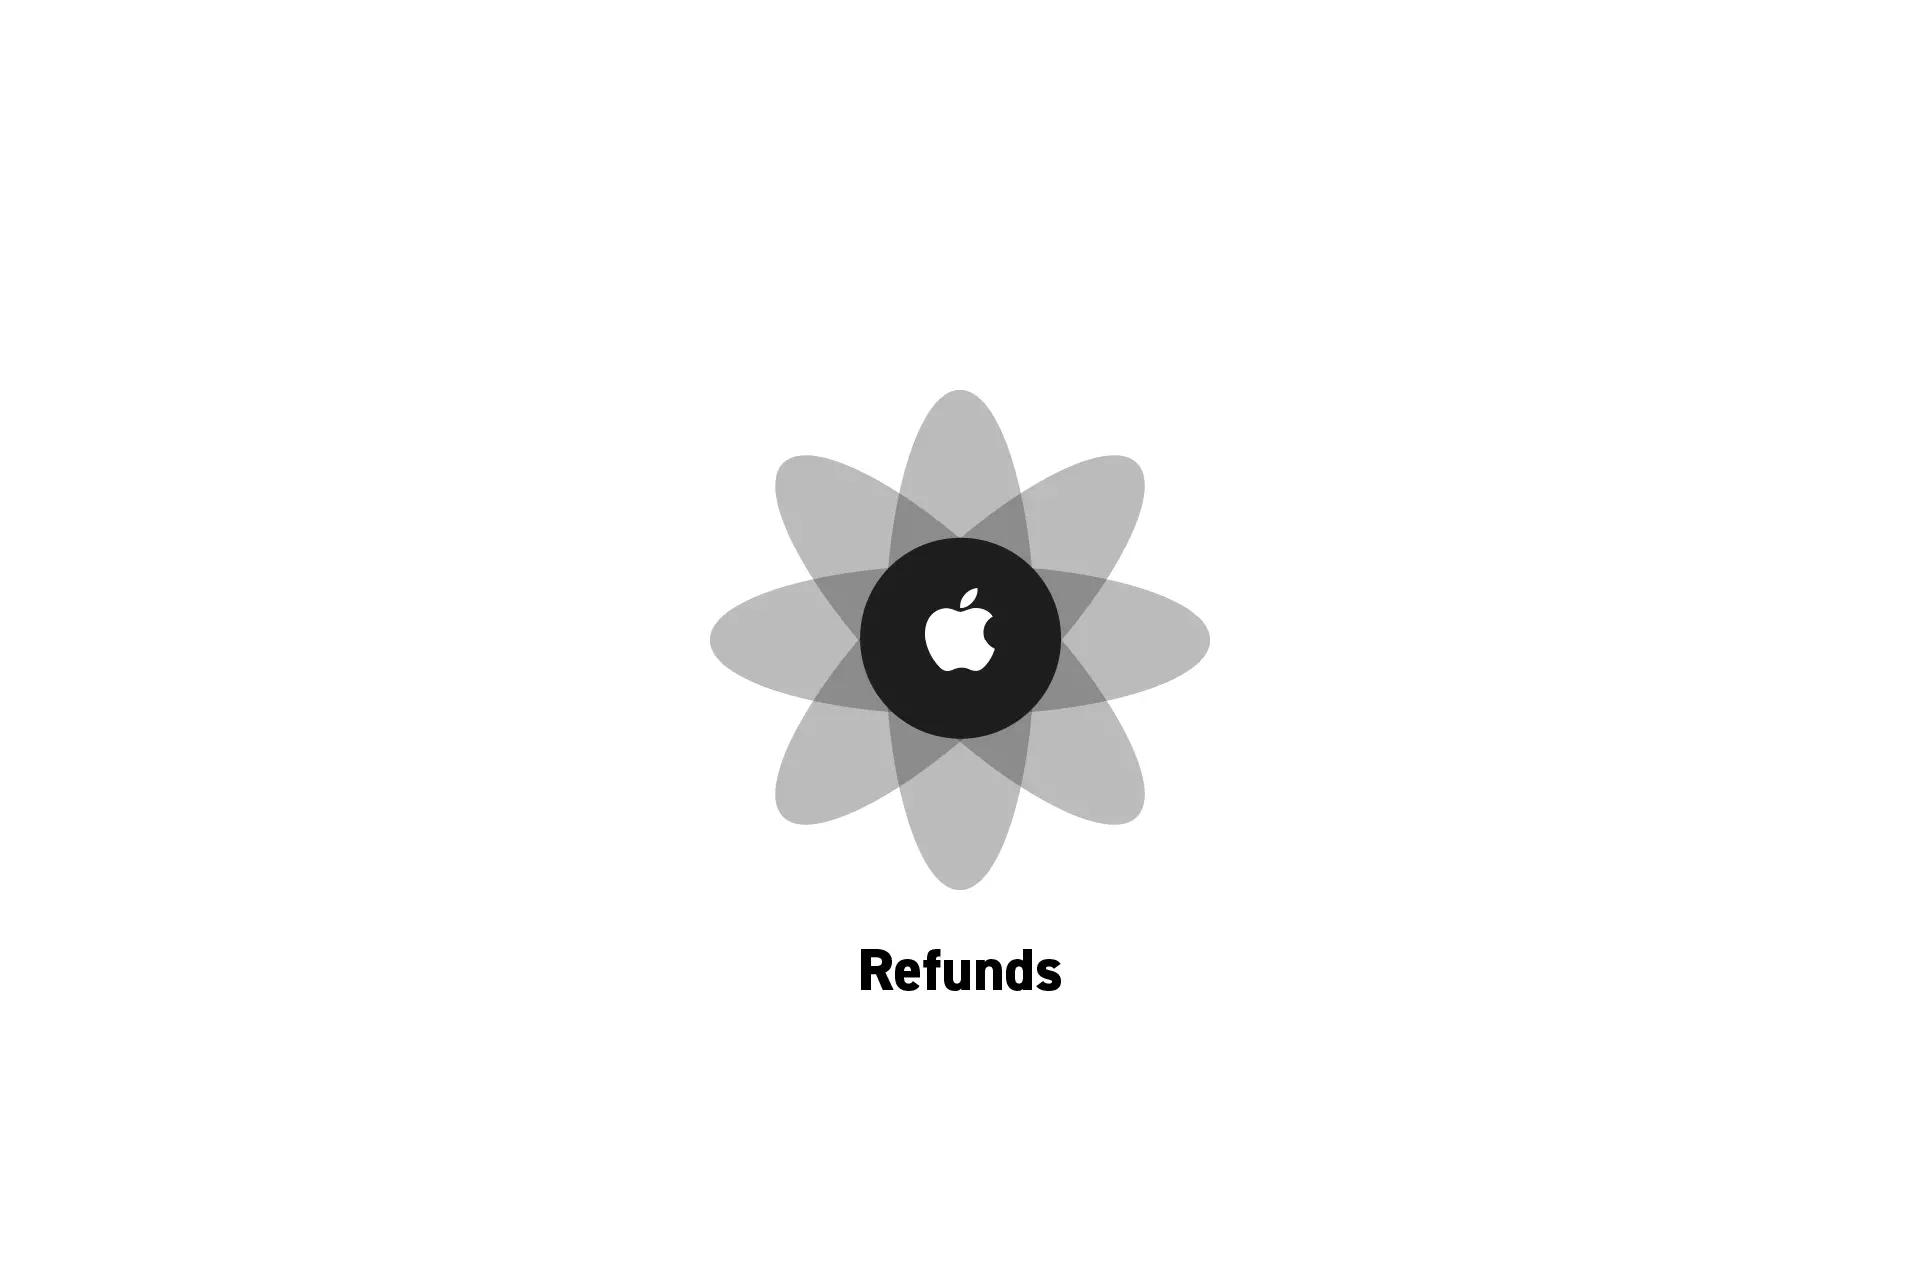 A flower that represents Apple with the text "Refunds" beneath it.